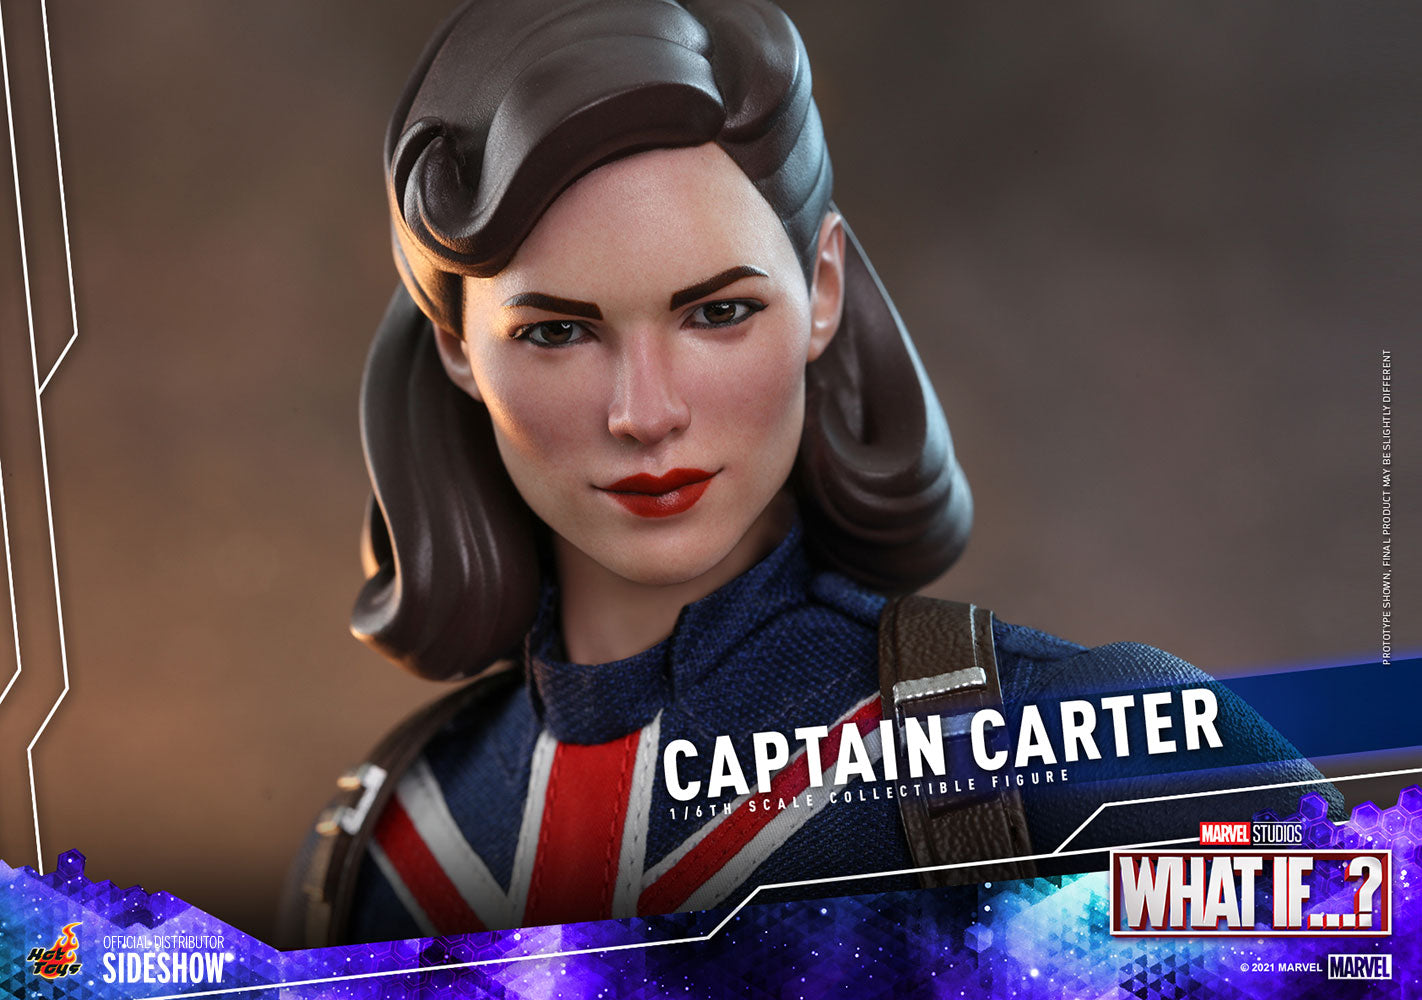 Captain Carter Marvel Studios' What If...? Sixth Scale Figure